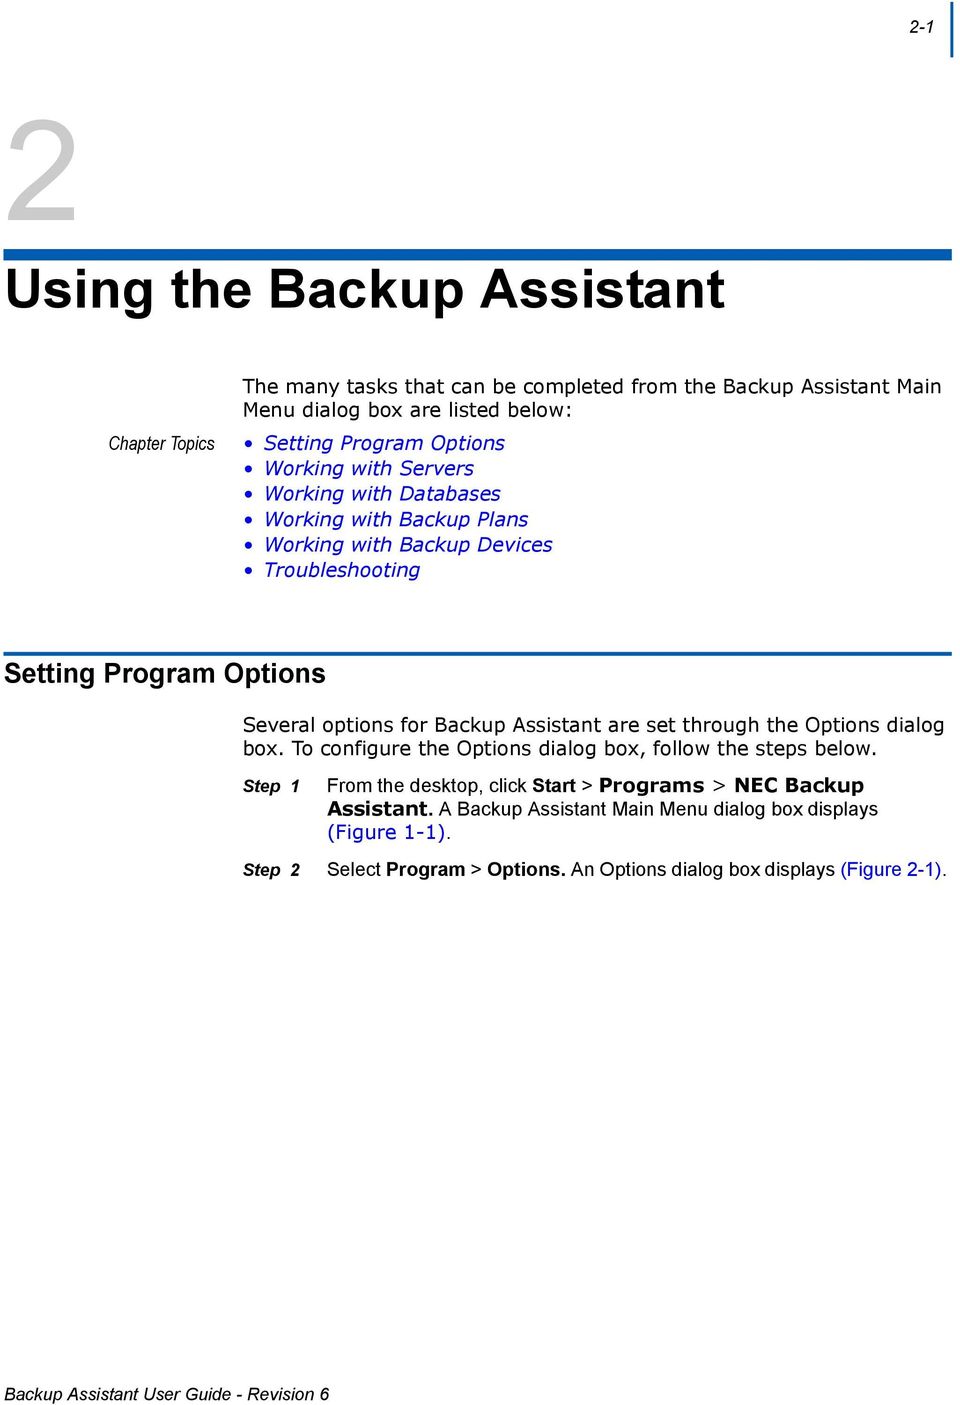 Backup Assistant are set through the Options dialog box. To configure the Options dialog box, follow the steps below.